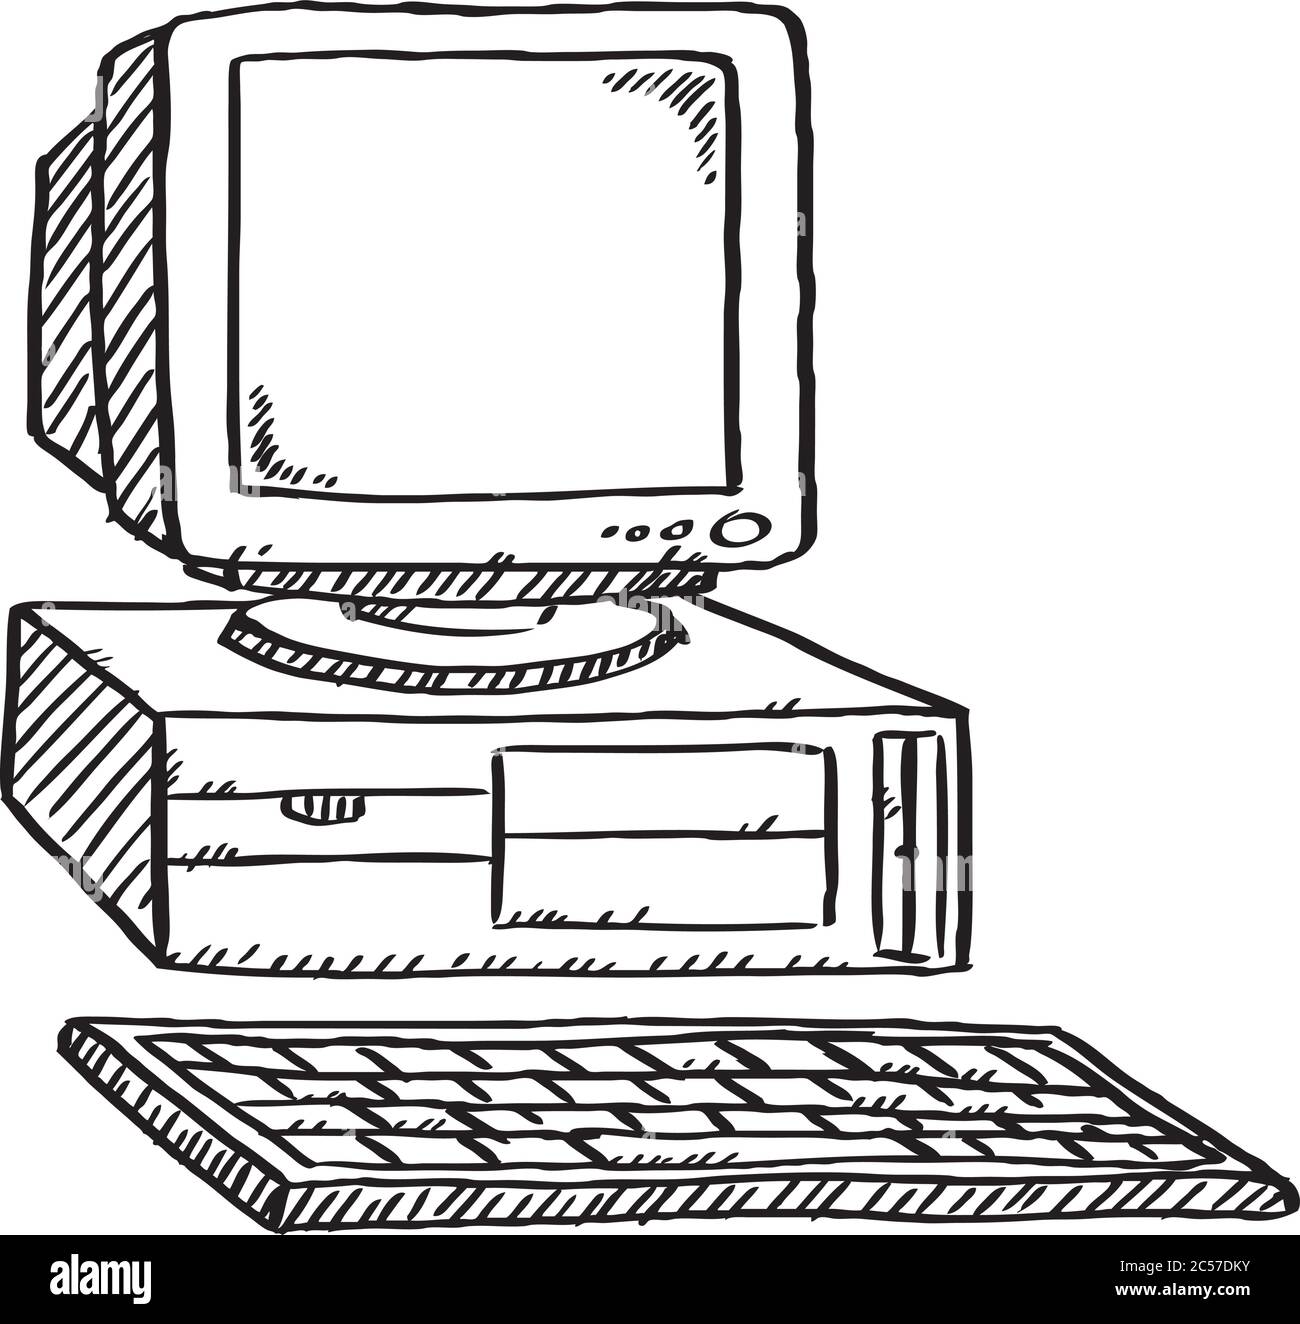 Black and white doodle of retro computer. Hand drawn doodle vector illustration. Stock Vector